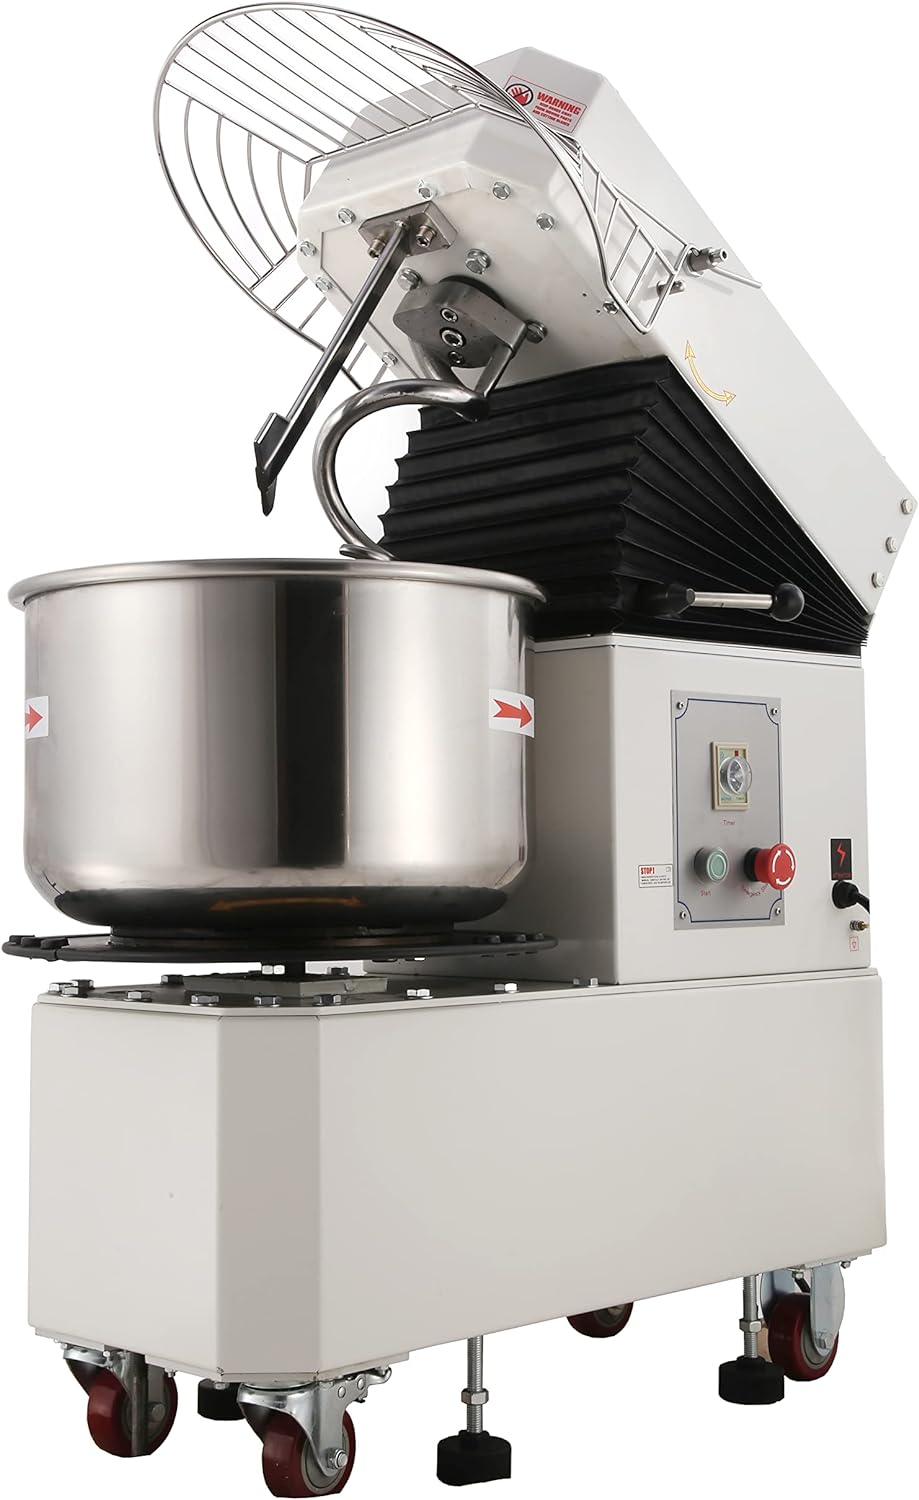 Hakka Commercial Dough Mixer, 30 Qt Rising Spiral Mixer Food Mixer Machine Dual Rotating Dough Kneading Machine with Food-grade Stainless Steel Bowl, Security Shield & Timer